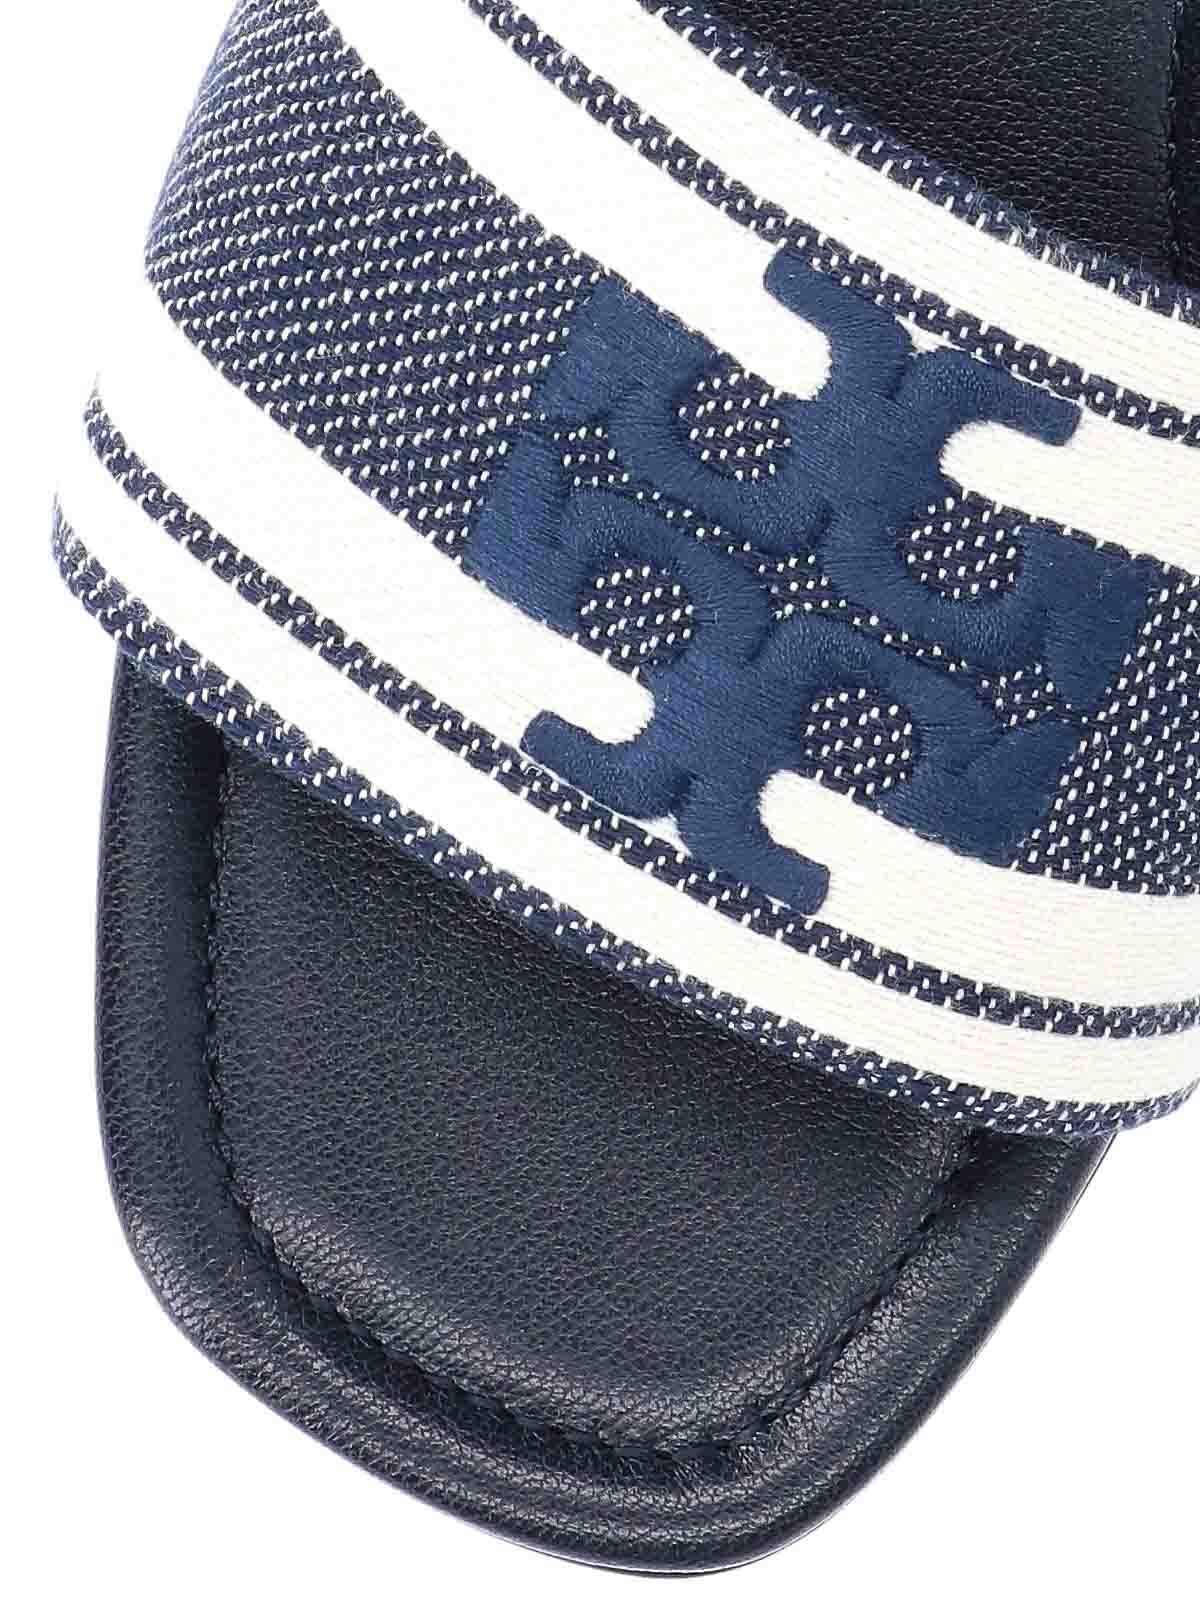 TORY BURCH DOUBLE T JACQUARD SLIDE IN BLUE